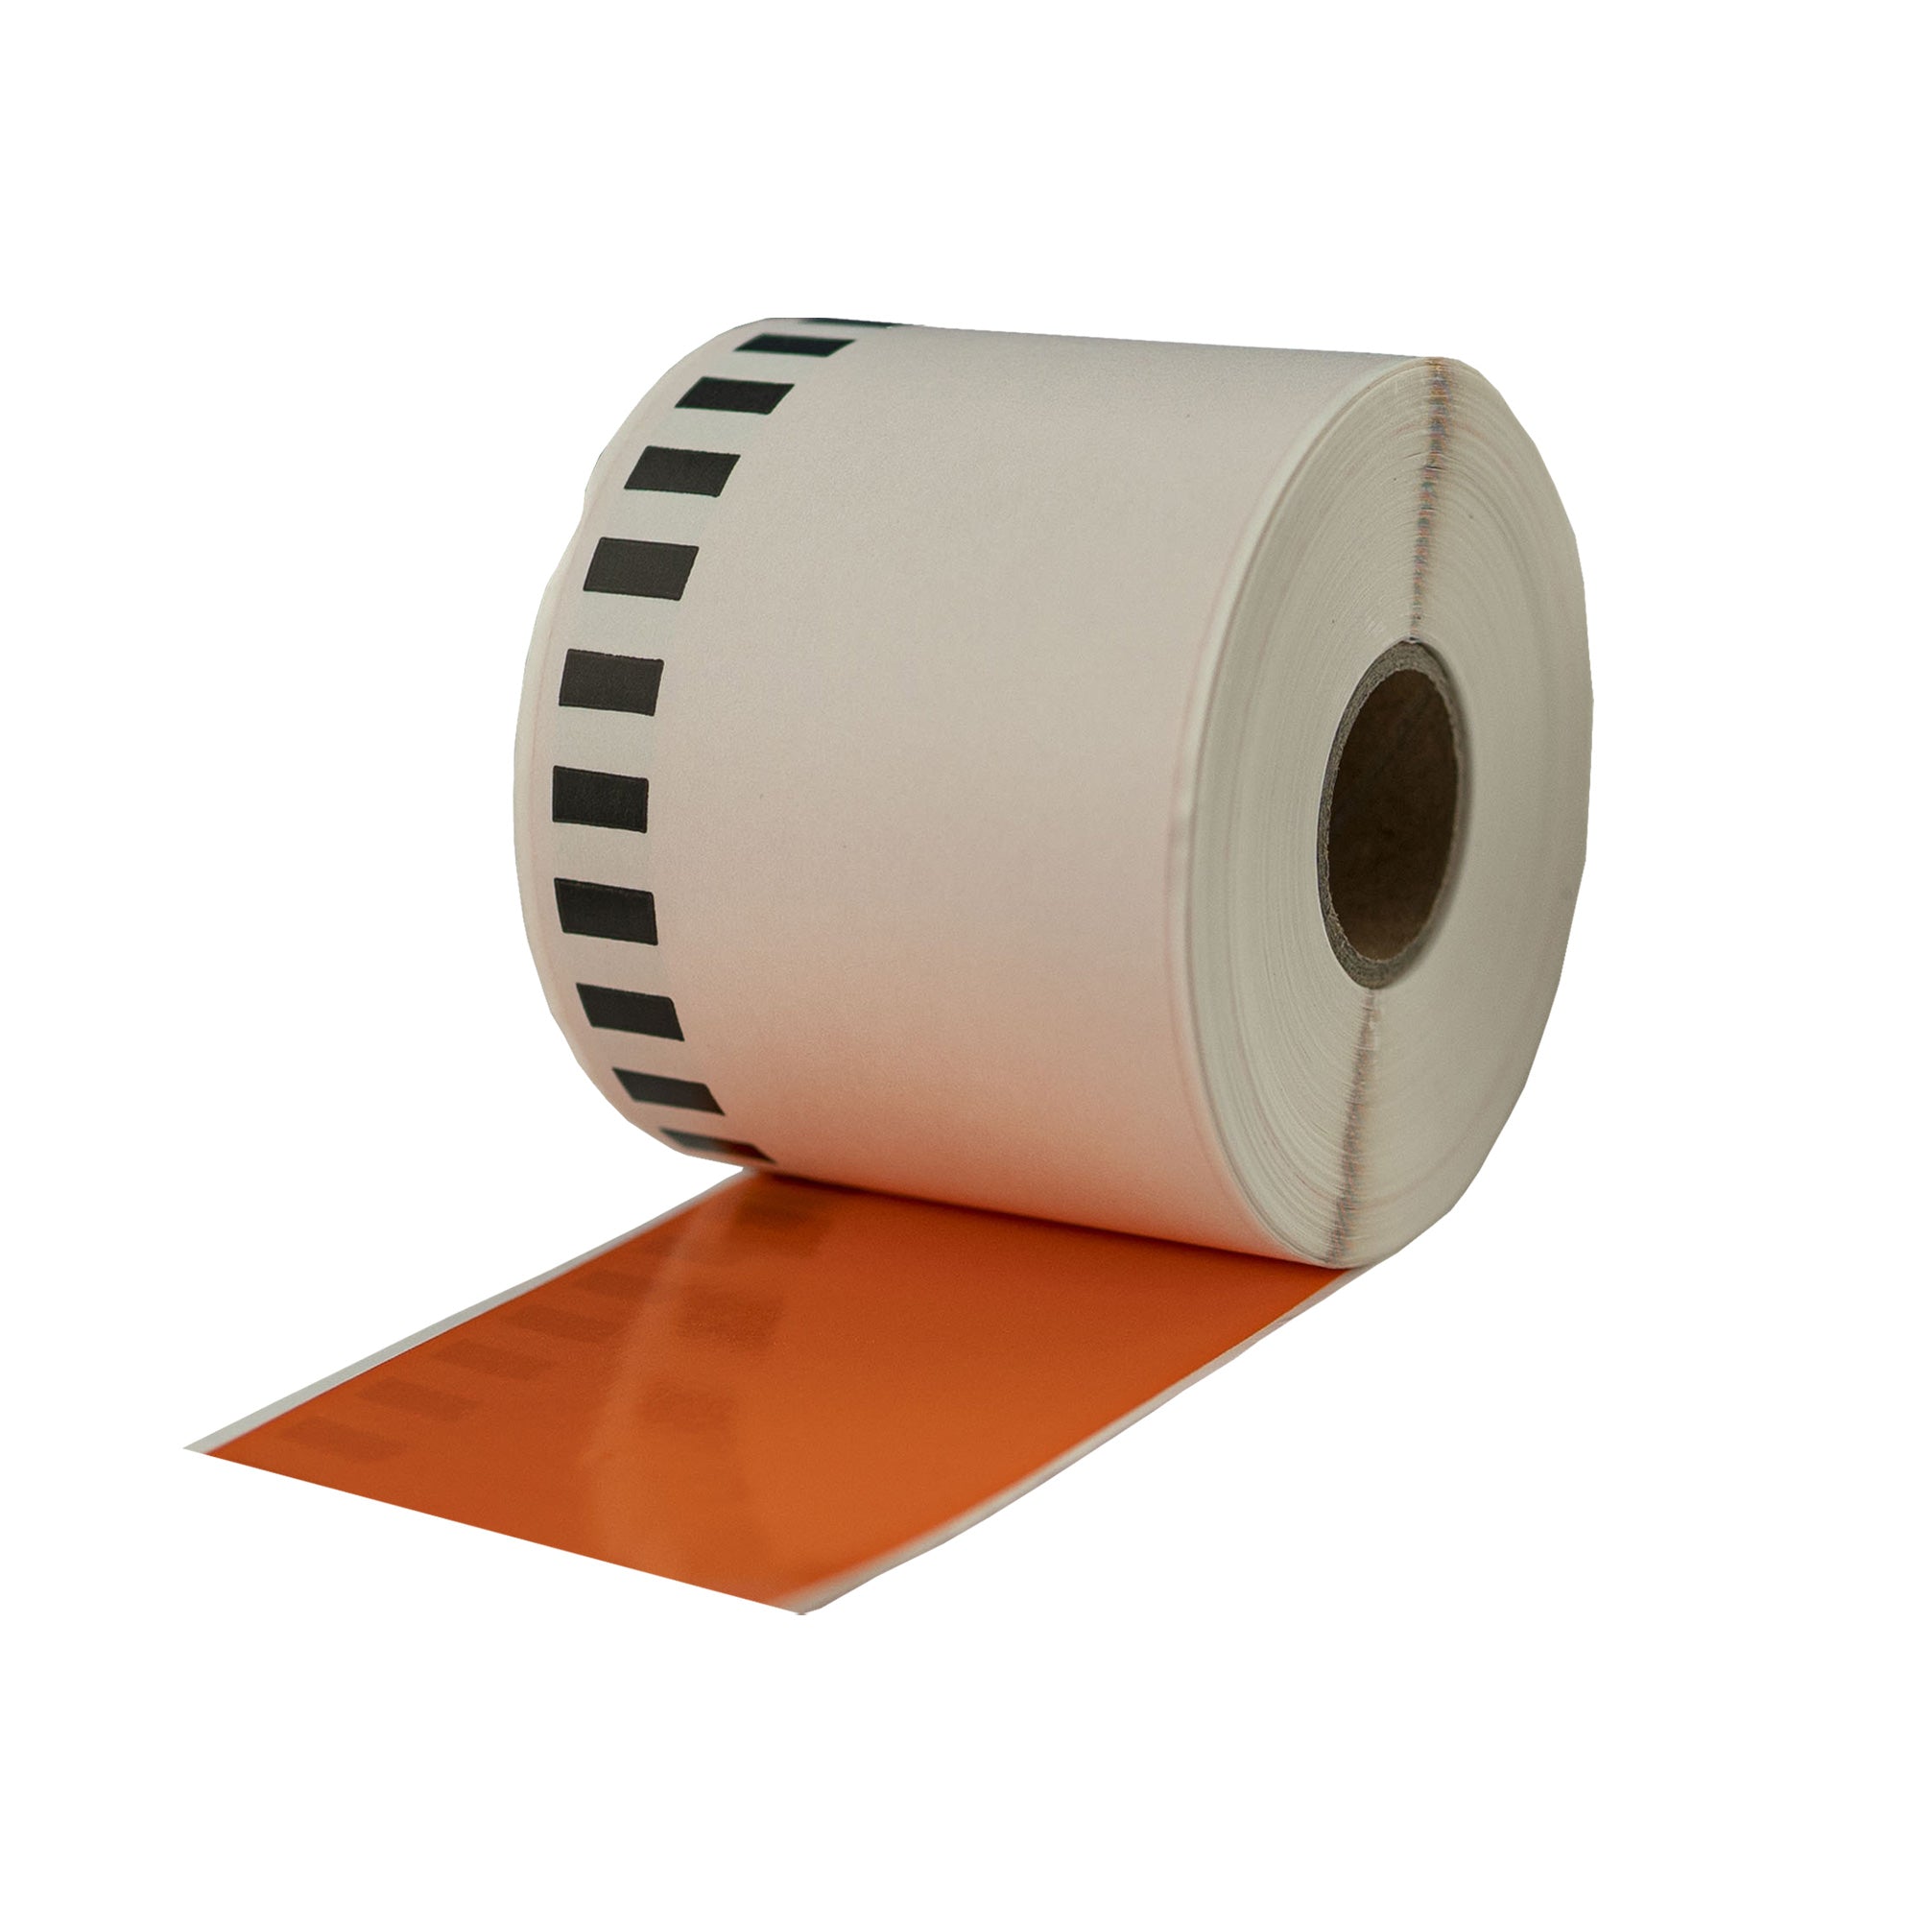 Compatible Brother DK-22205 Orange Refill Label Tapes 62mm x 30.4m/ 50 Rolls